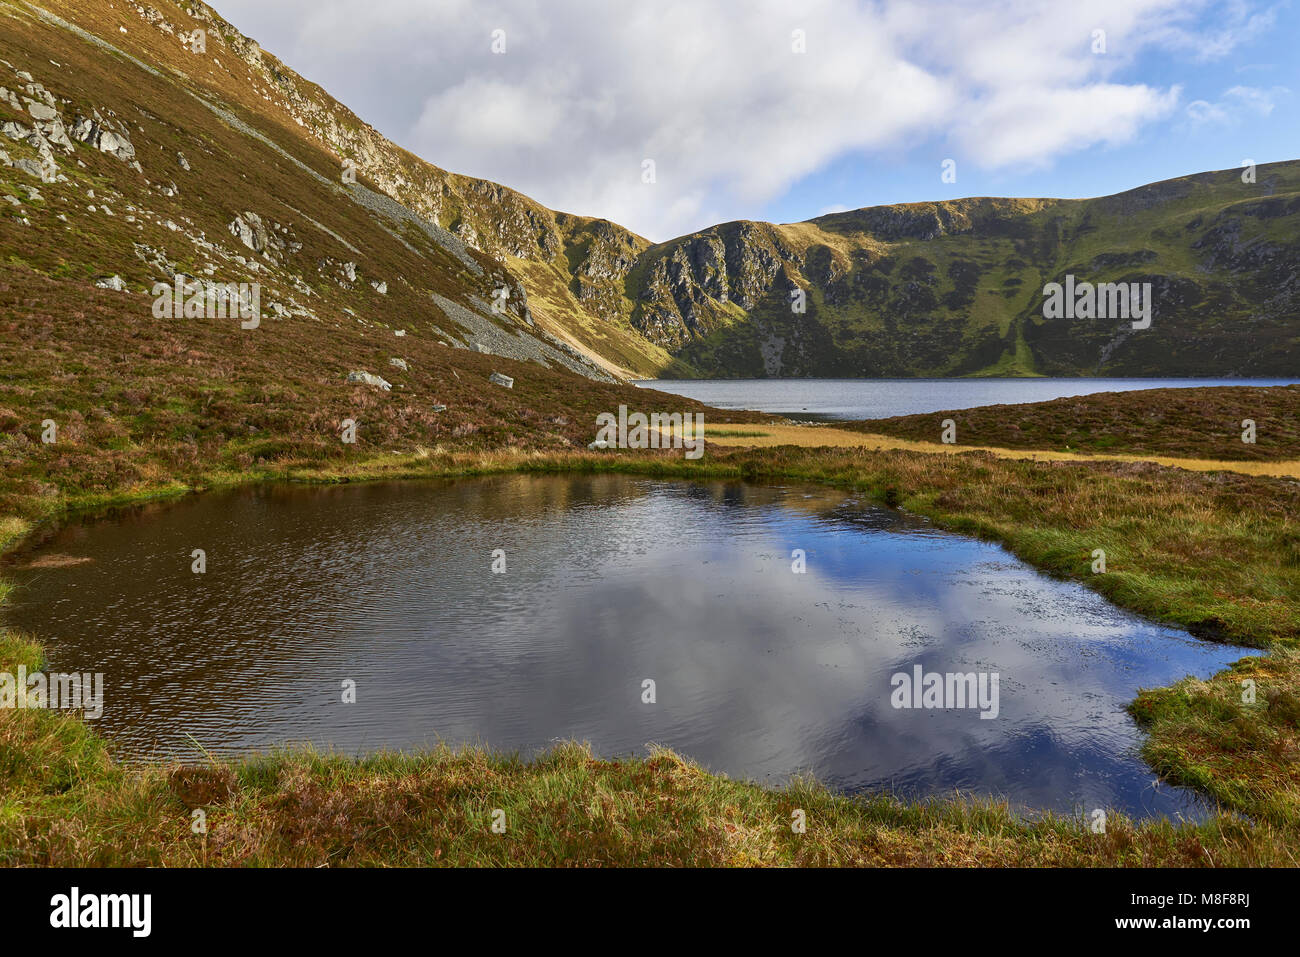 Looking past a small Pond and on towards Green Hill and Loch Brandy, situated in Glen Clova in the Angus Glens of Scotland. Stock Photo